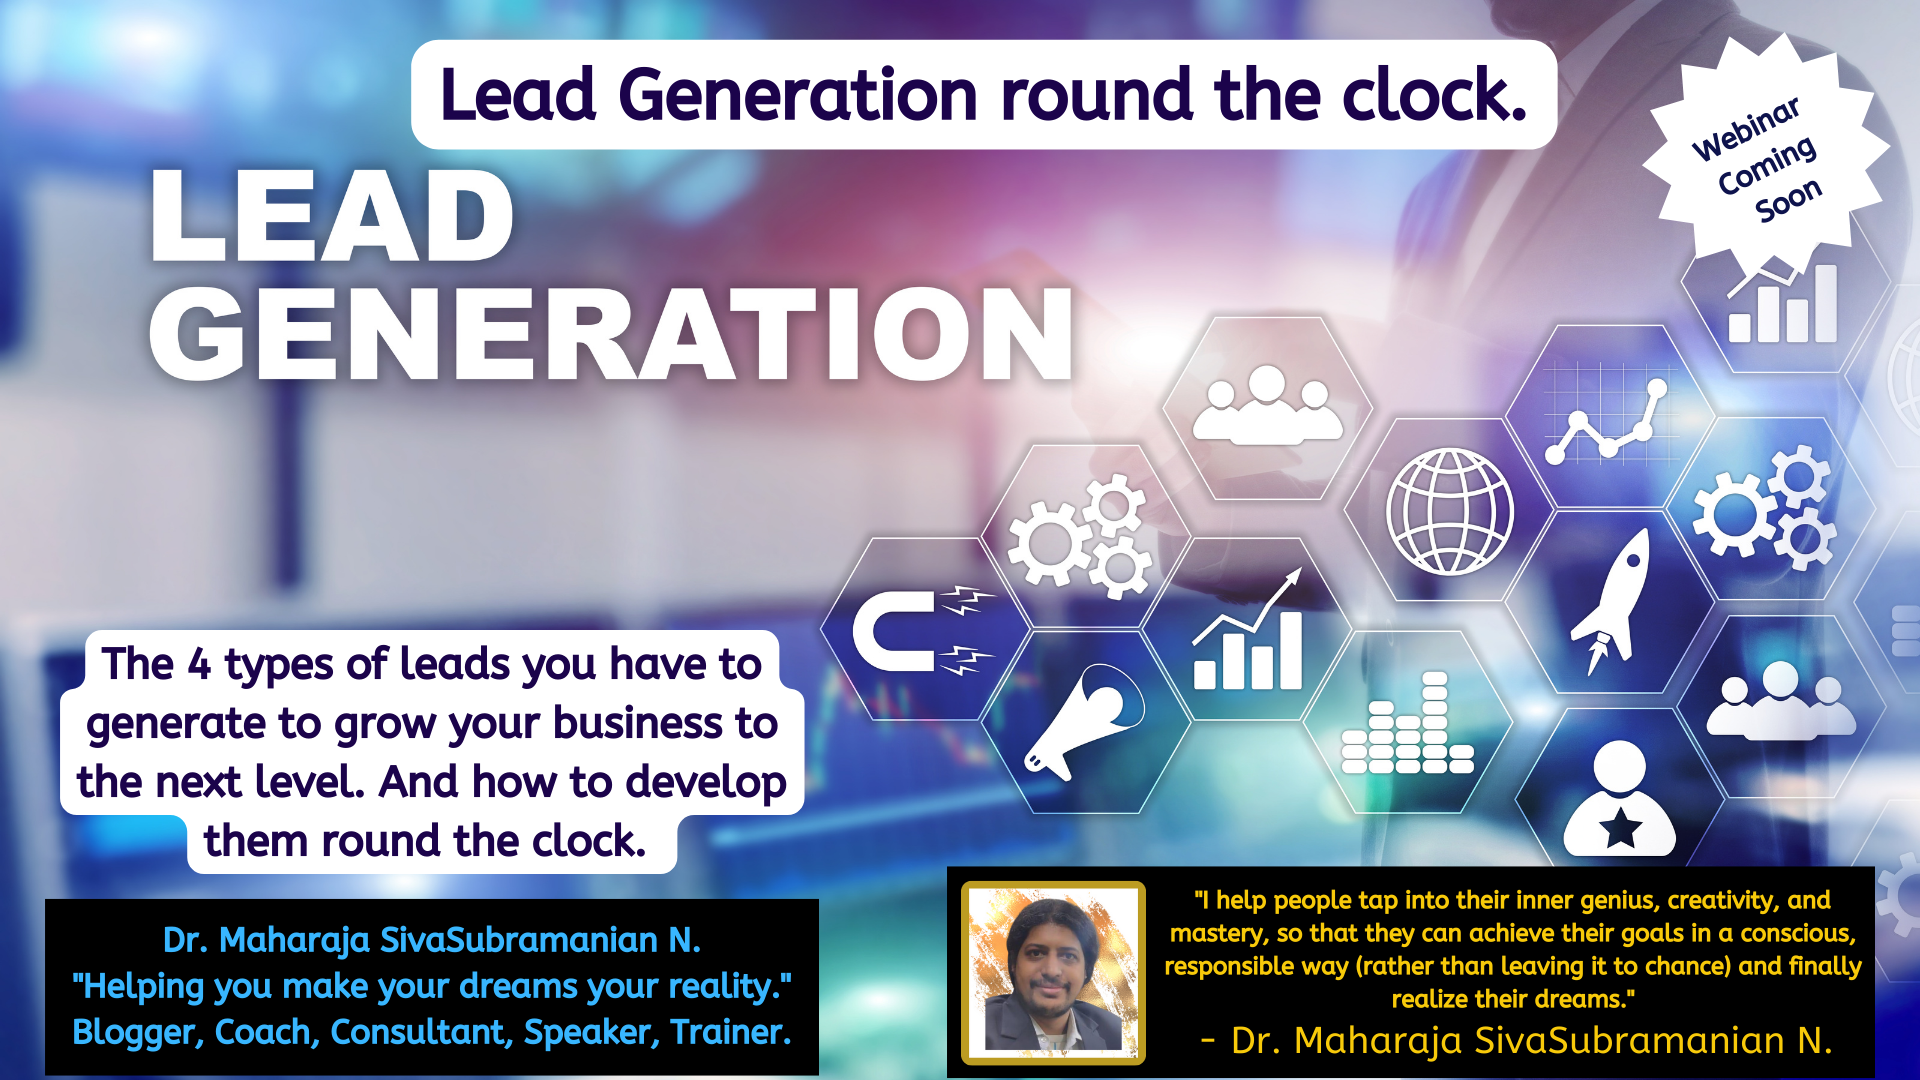 Lead Generation round the clock for Life Coaches. – Upcoming free webinar.